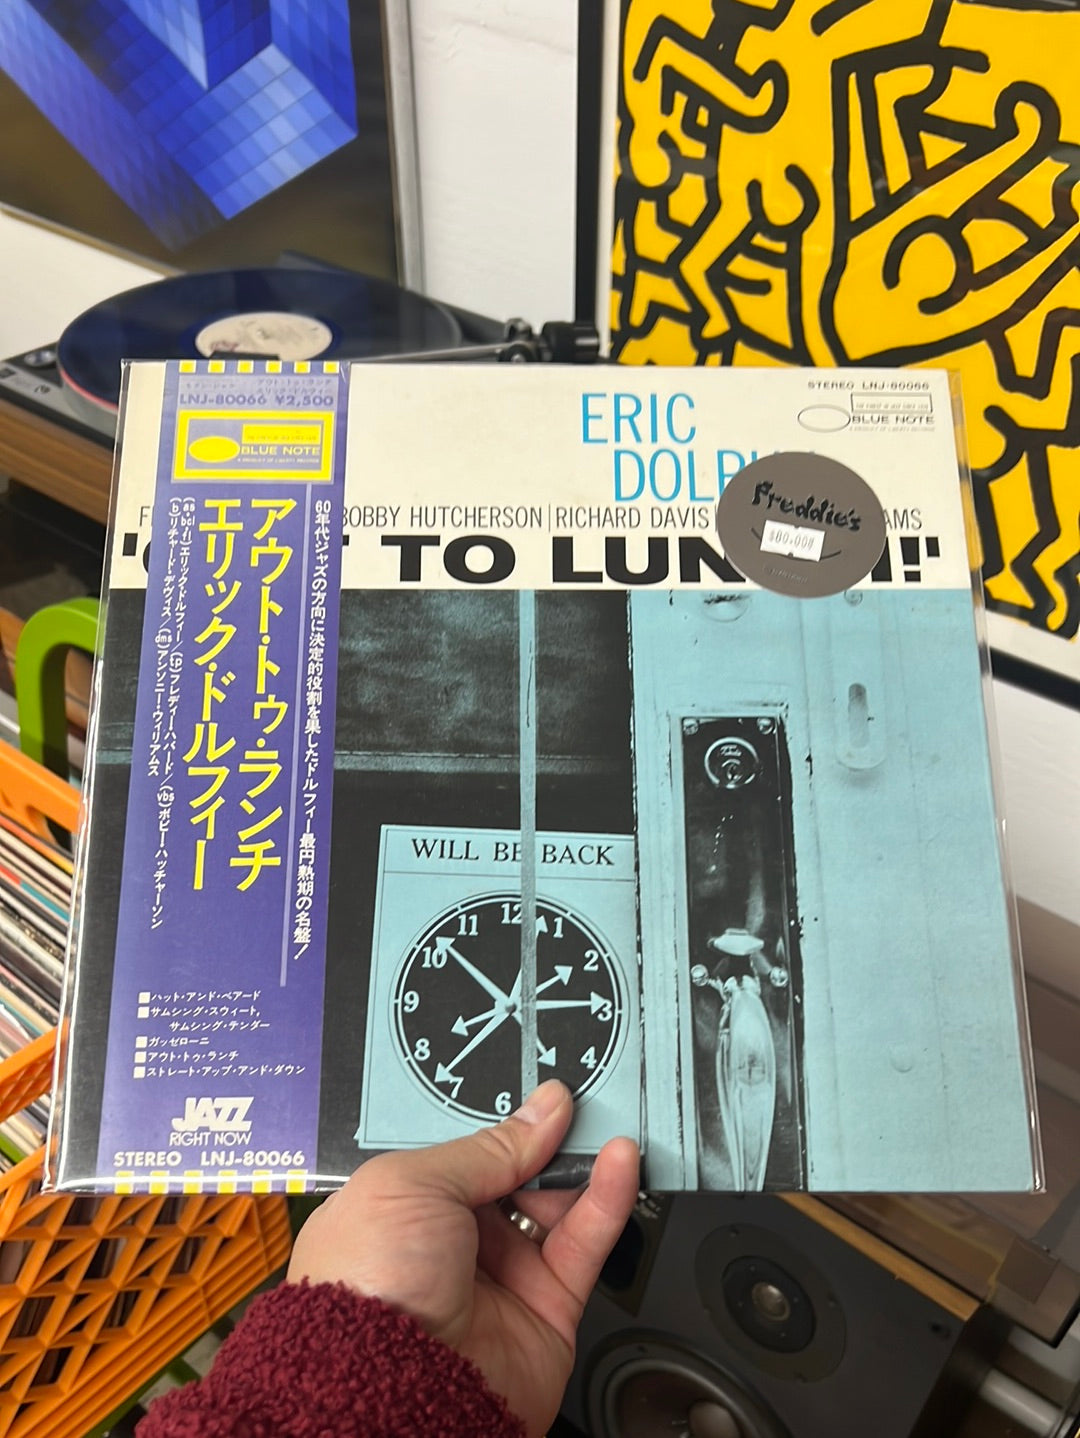 Eric Dolphy - Out to lunch JAPAN OBI LNJ - 80066